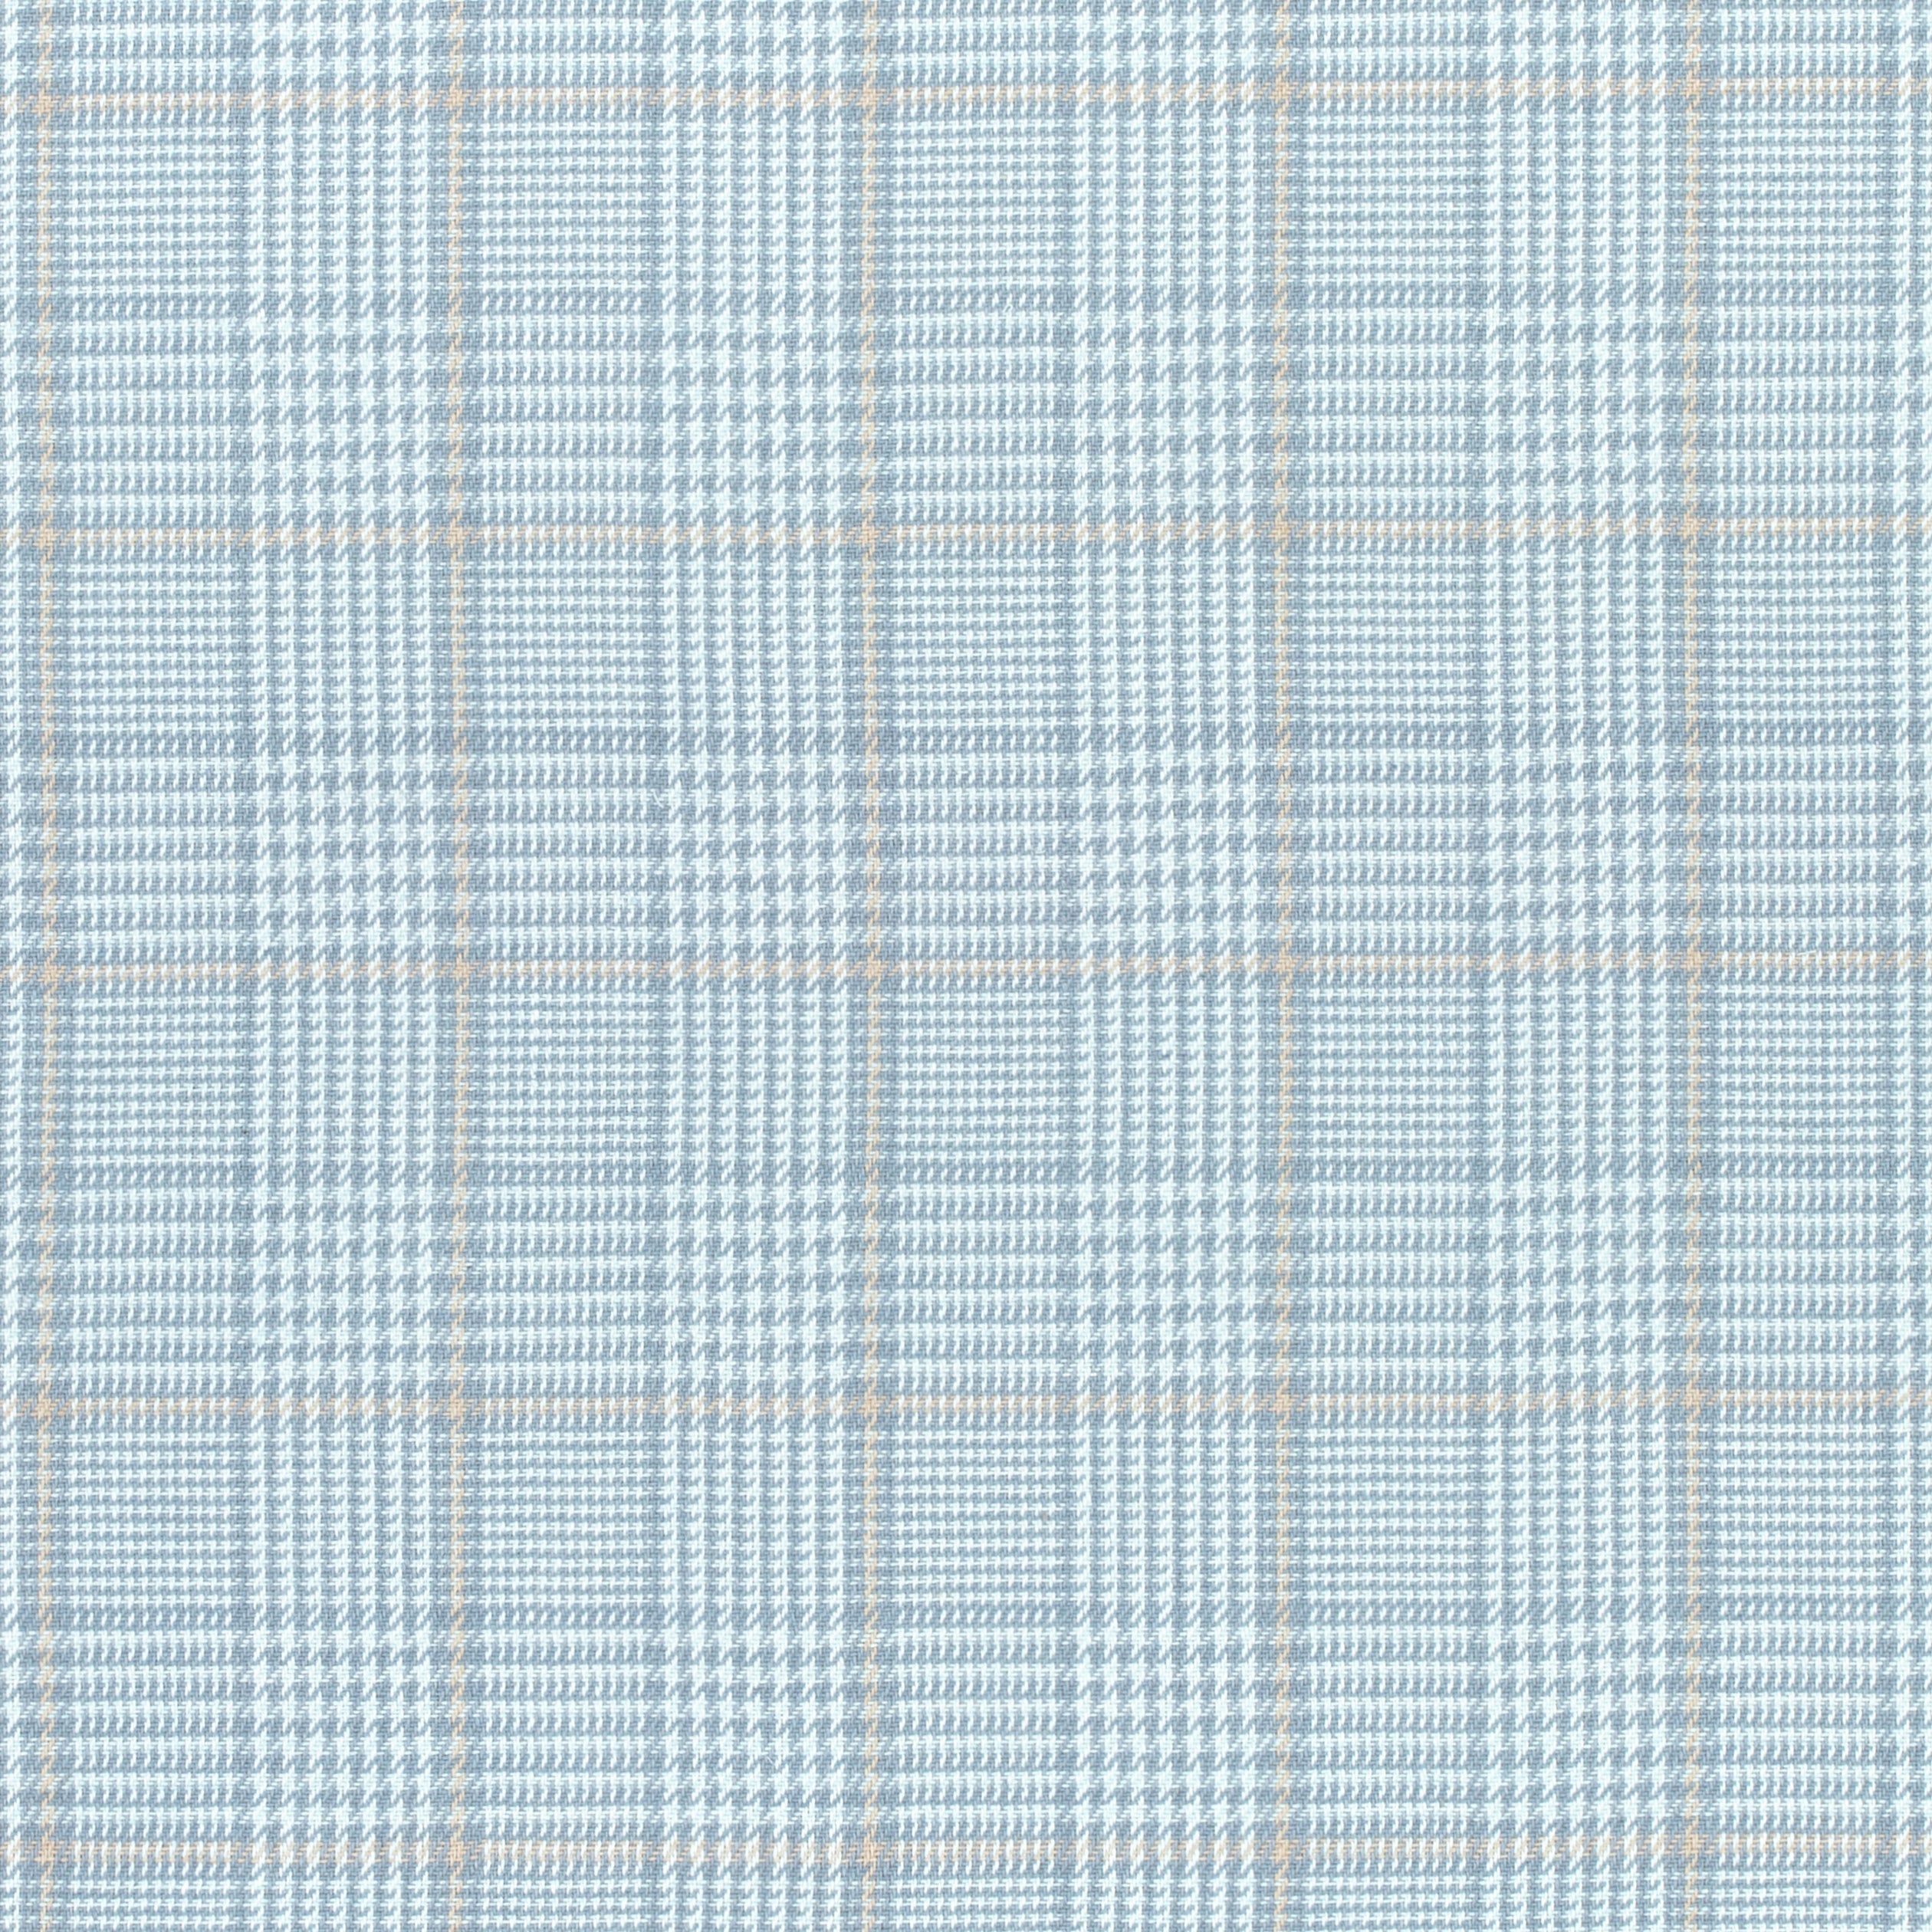 Grassmarket Check fabric in slate blue color - pattern number W710203 - by Thibaut in the Colony collection